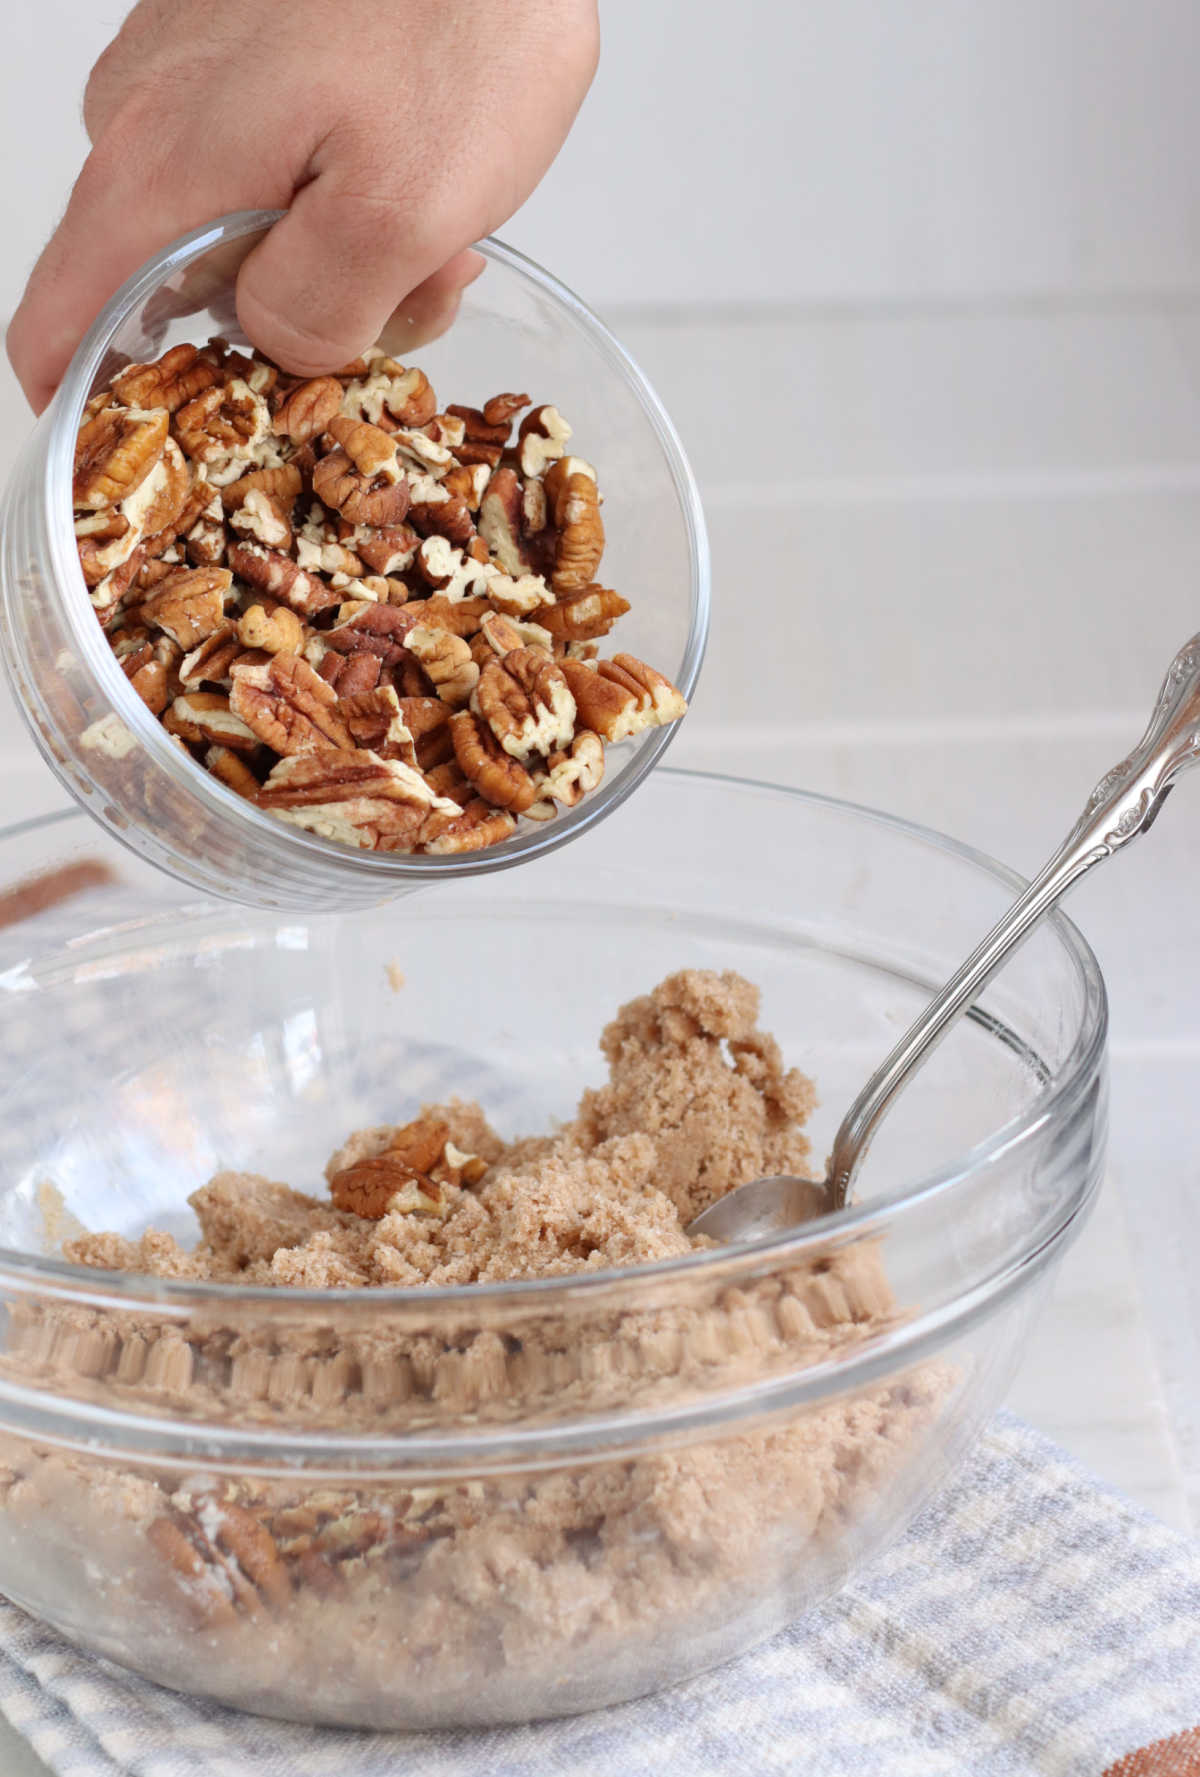 Dumping pecans into crumb topping in clear glass bowl.